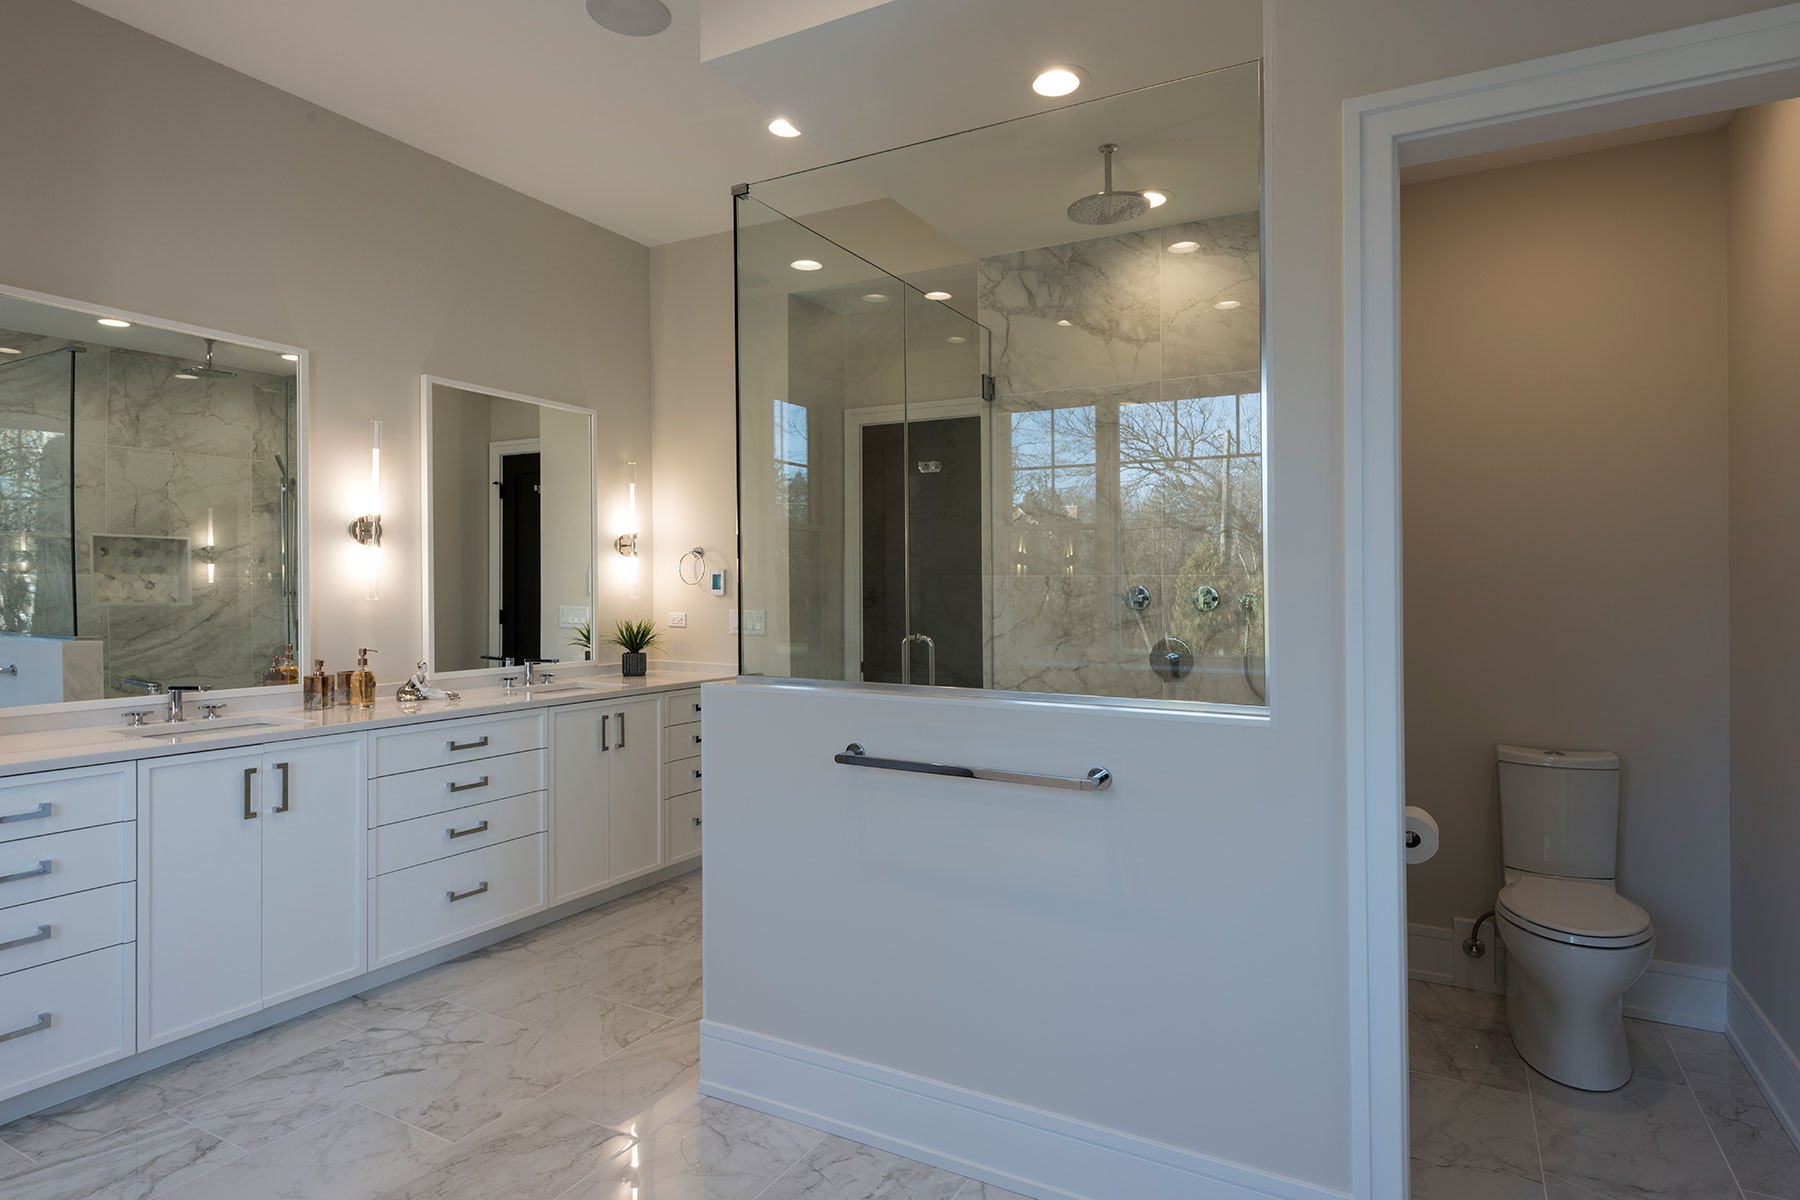 MasterBed - 511 N Branch Rd., Glenview, IL Custom Home. America's Custom Home Builders: New Construction, Remodeling, Restoration Services. Residential and Commercial.